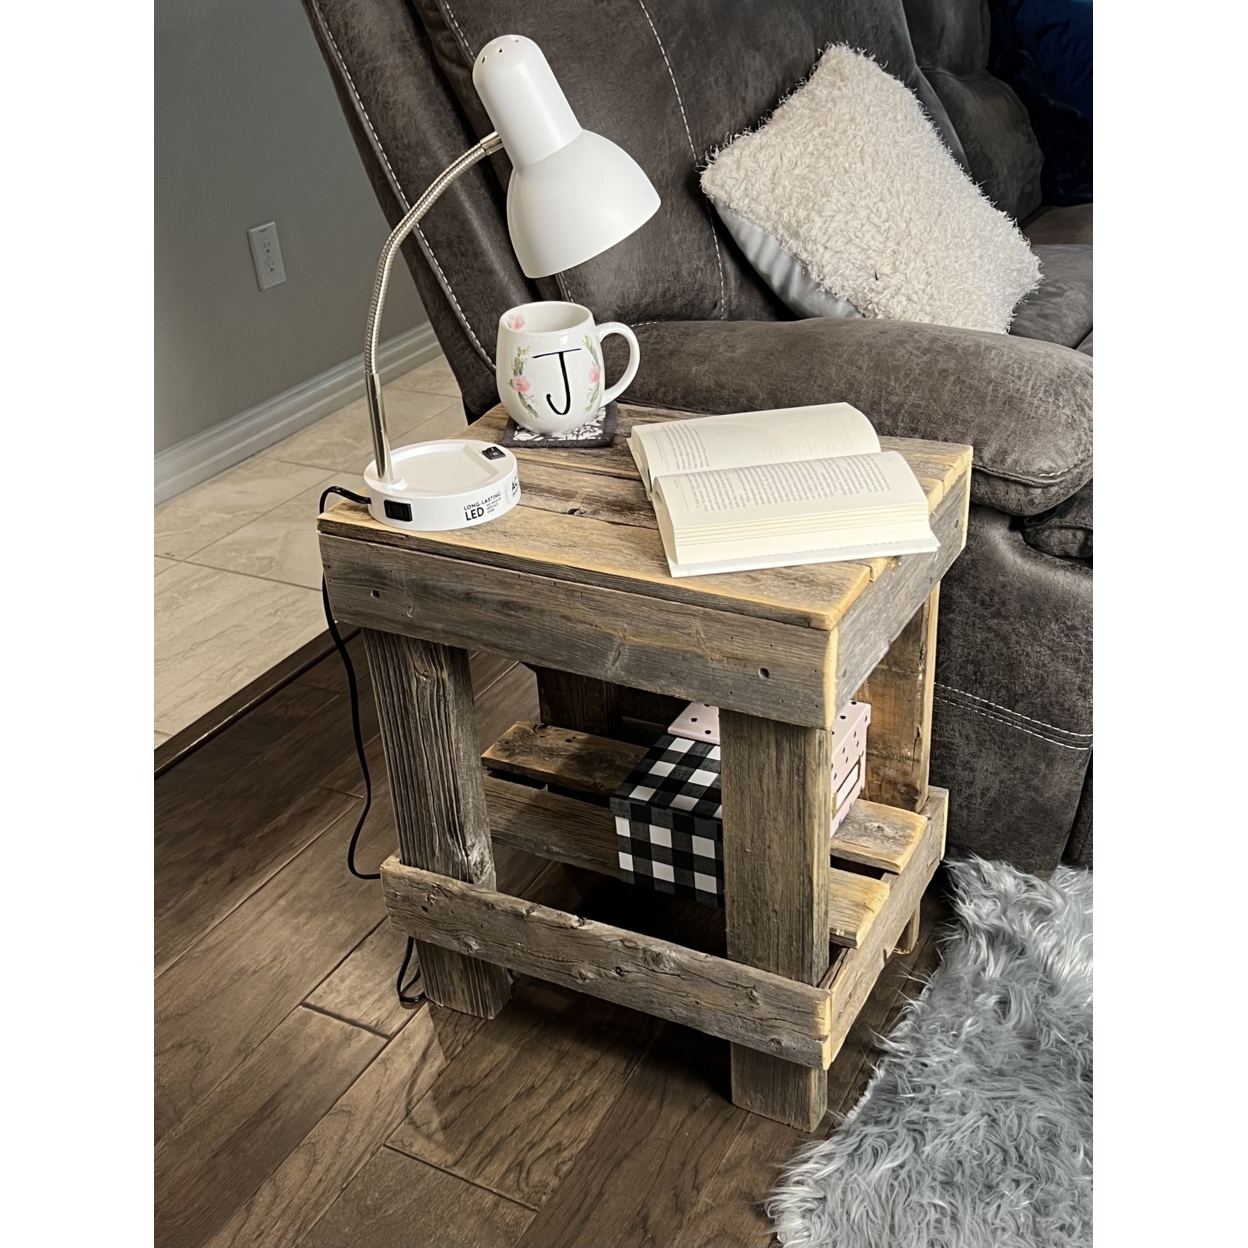 Reclaimed Wood Rustic Bedside or Living Room End Side Table Country Charm Farmhouse Nightstand - Natural